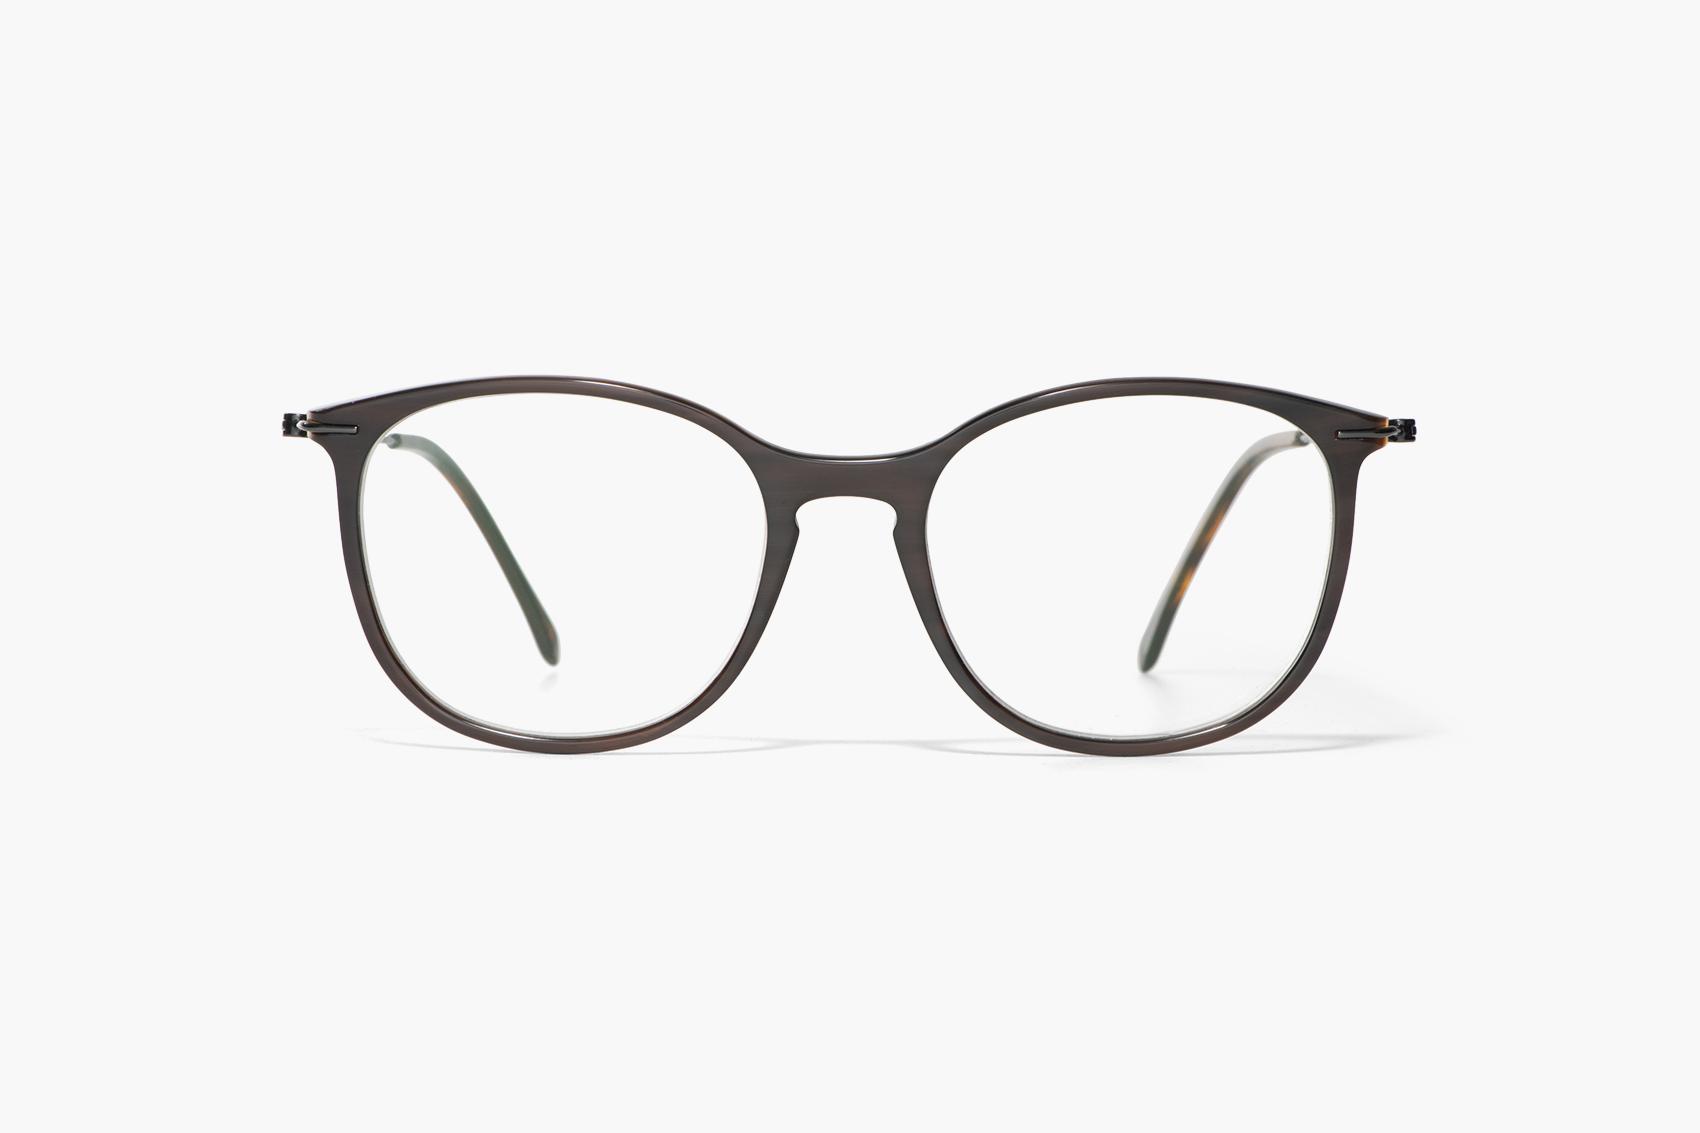 T87022 by HOFFMANN NATURAL EYEWEAR, Try on glasses online & find optician